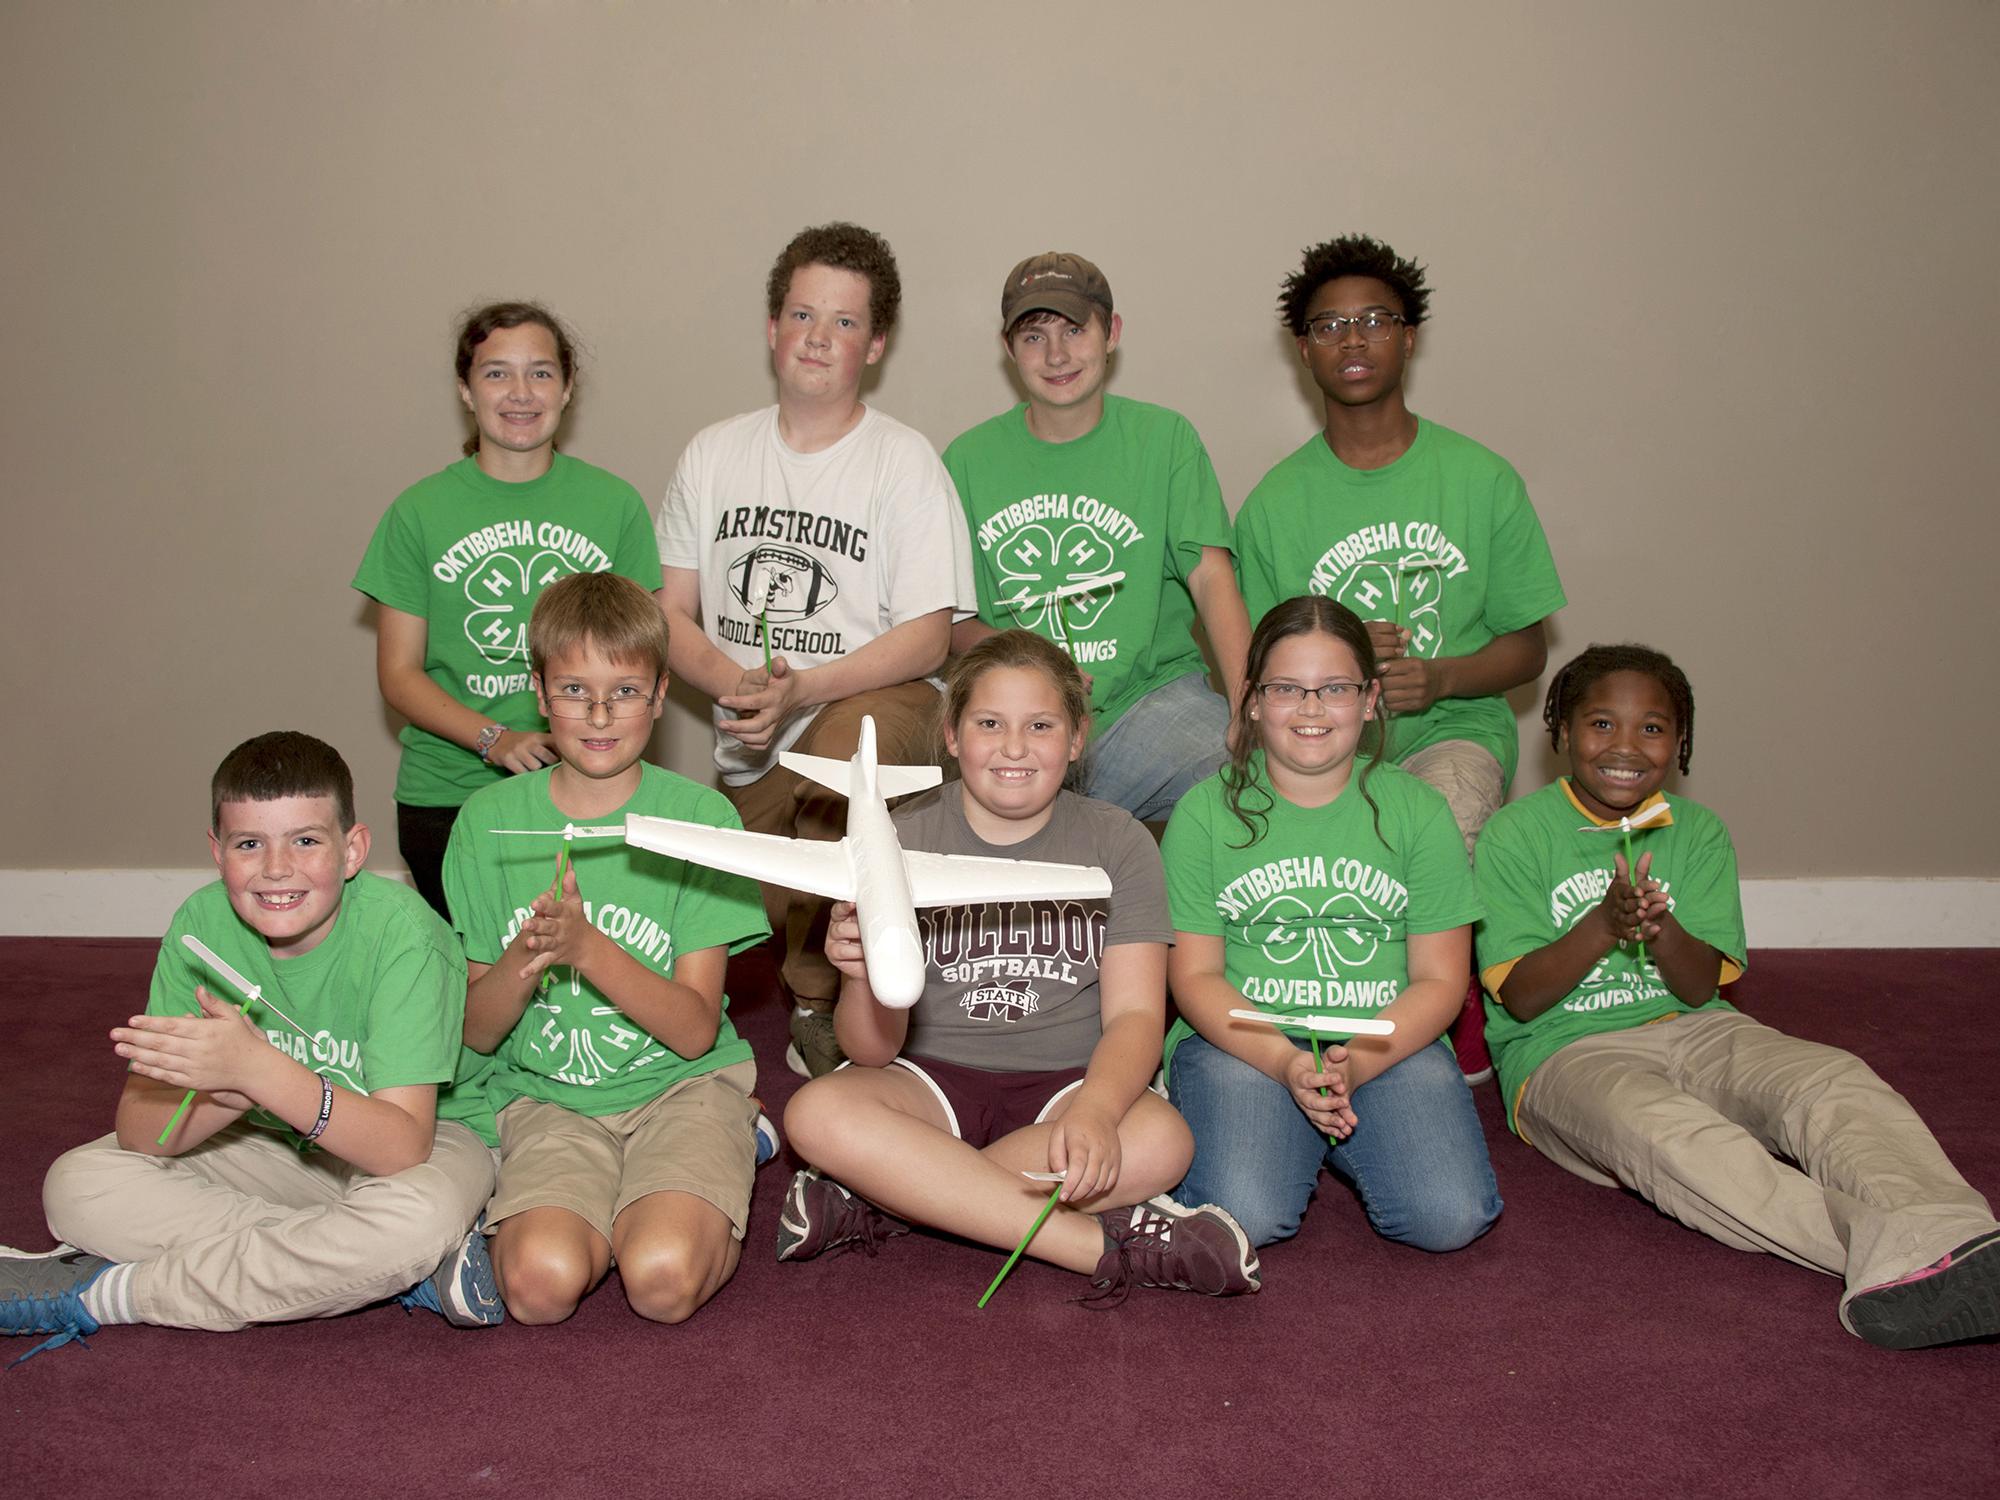 Mississippi 4-H’ers in the Oktibbeha County Clover Dawgs robotics engineering club celebrate 4-H National Youth Science Day. The Oct. 5 event features an engineering challenge for young people. (Photo by MSU Extension Service/Kat Lawrence)